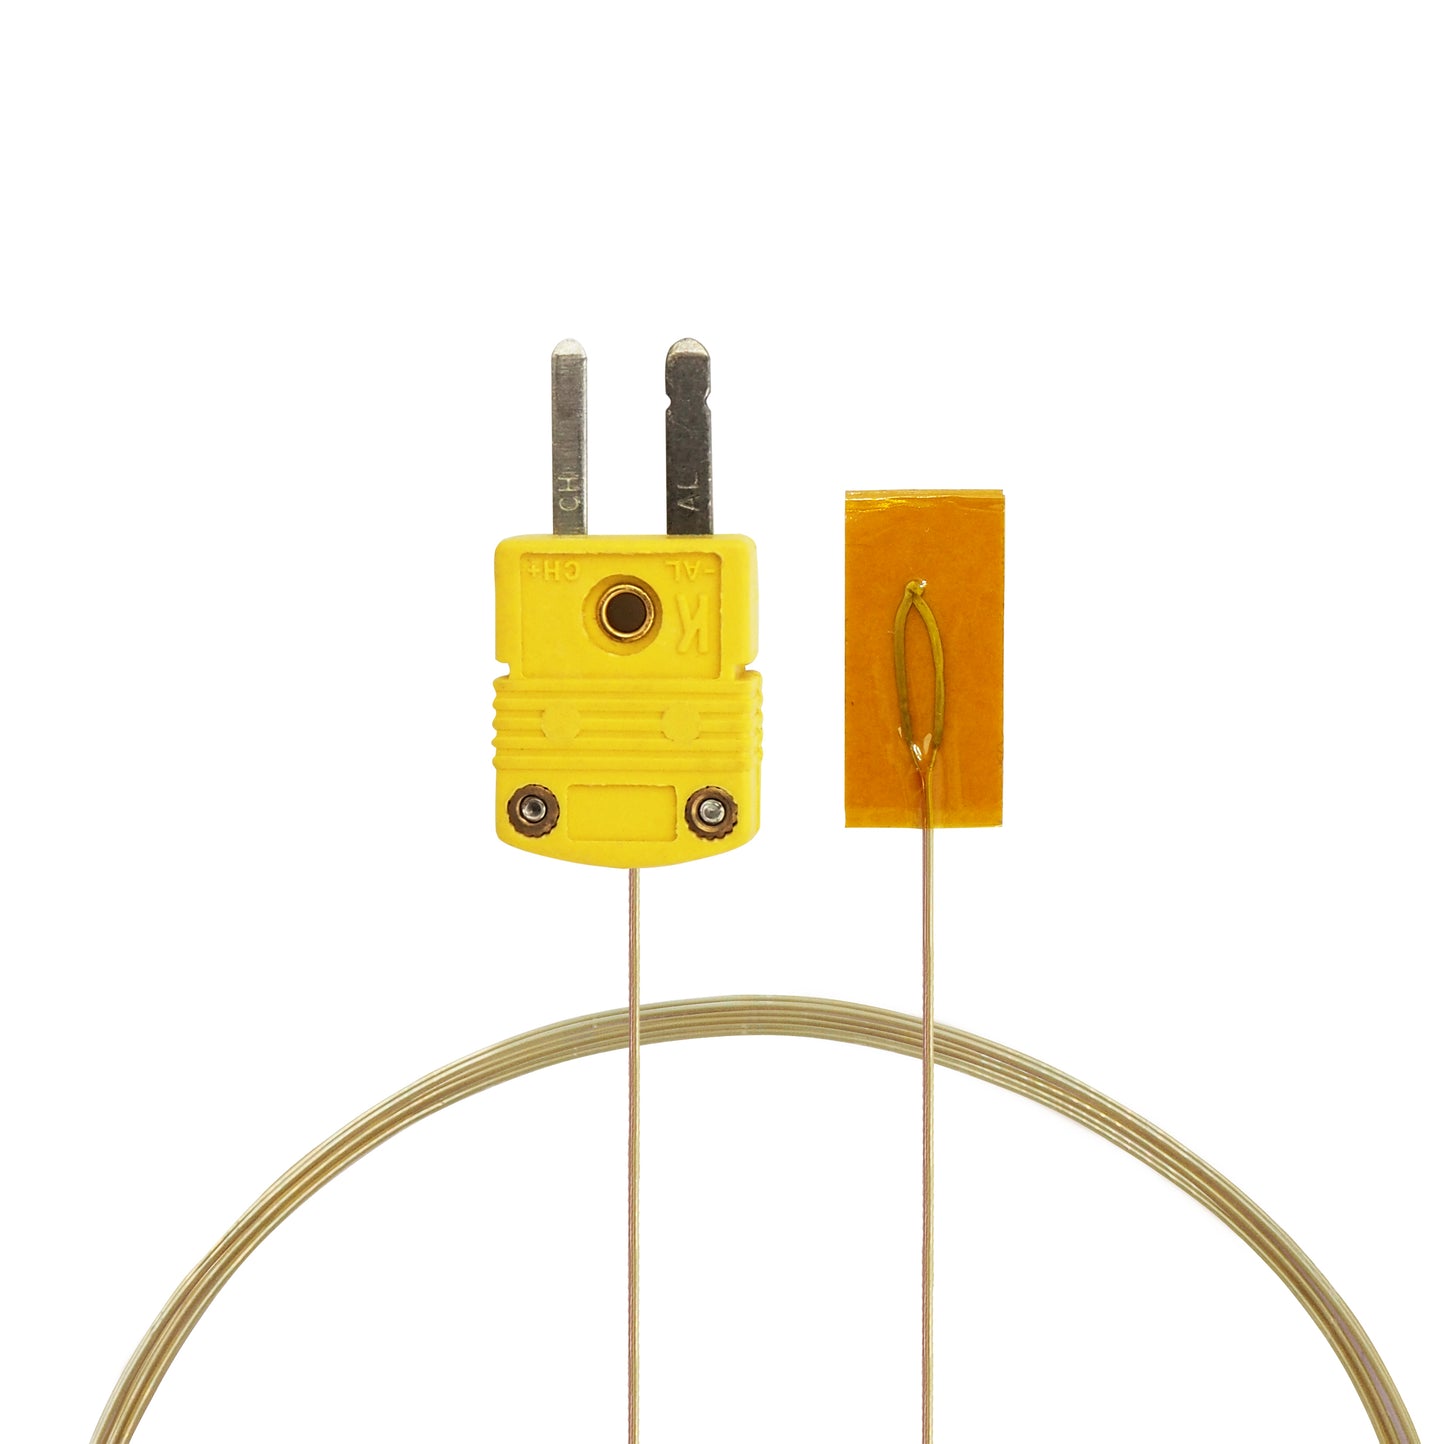 Surface Contact 0.25 mm diameter K-Type Sensor Probe with Sticker for K-Type Thermocouple, Yellow Cable, Main